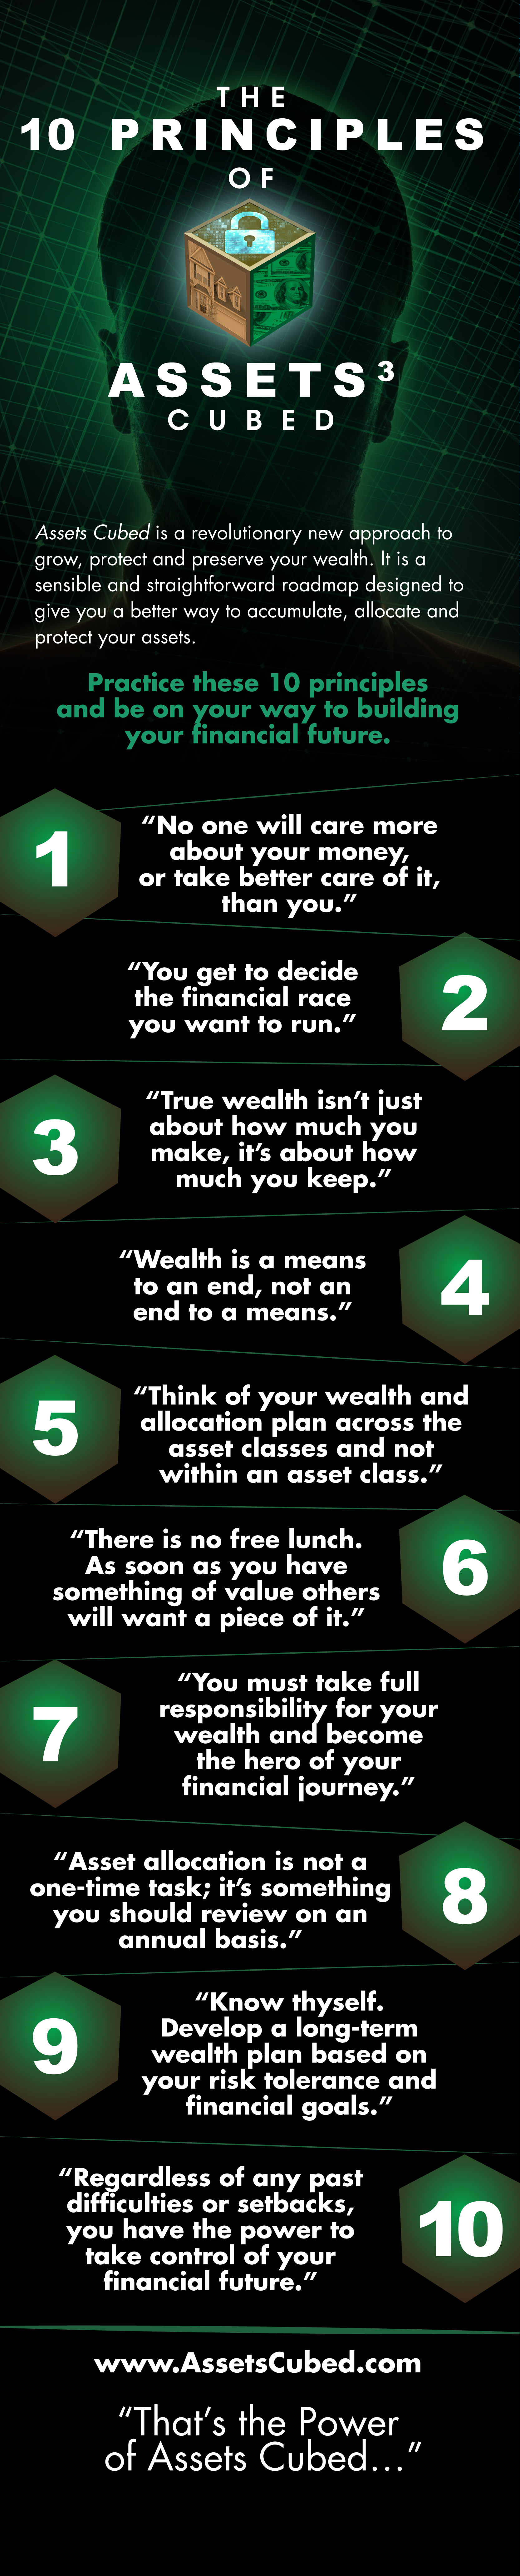 Assets Cubed Infographic